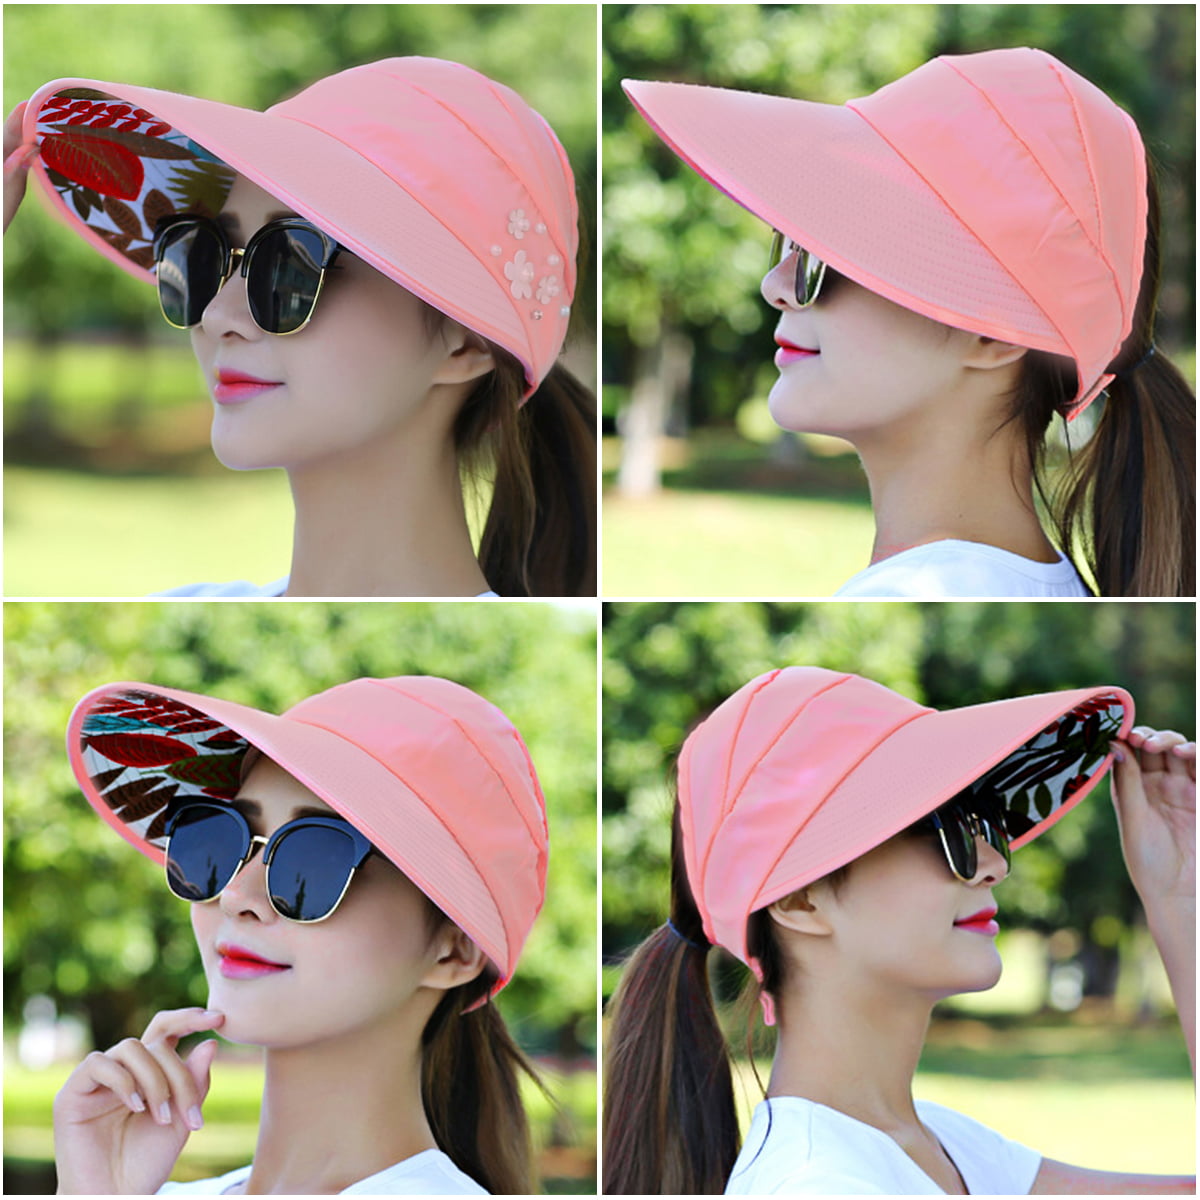 RITUMO Clip On Sun Visors Foldable Sun Hats for Women with UV Protection Wide Brim Summer Packable Shell Hat